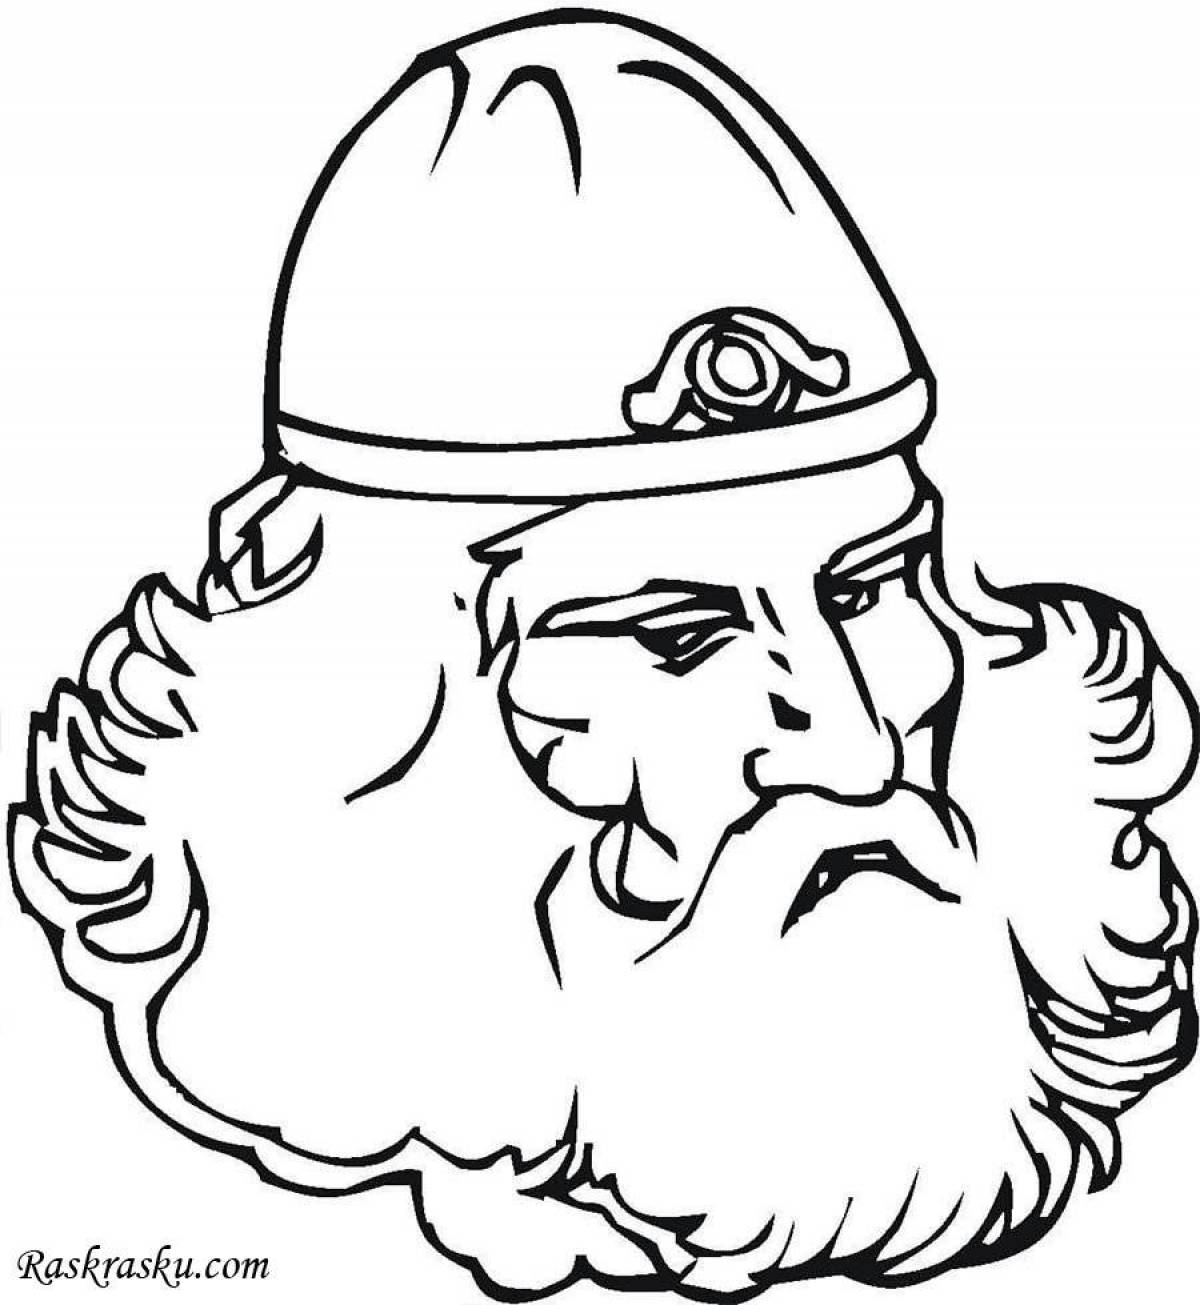 Charming bodo beard coloring page